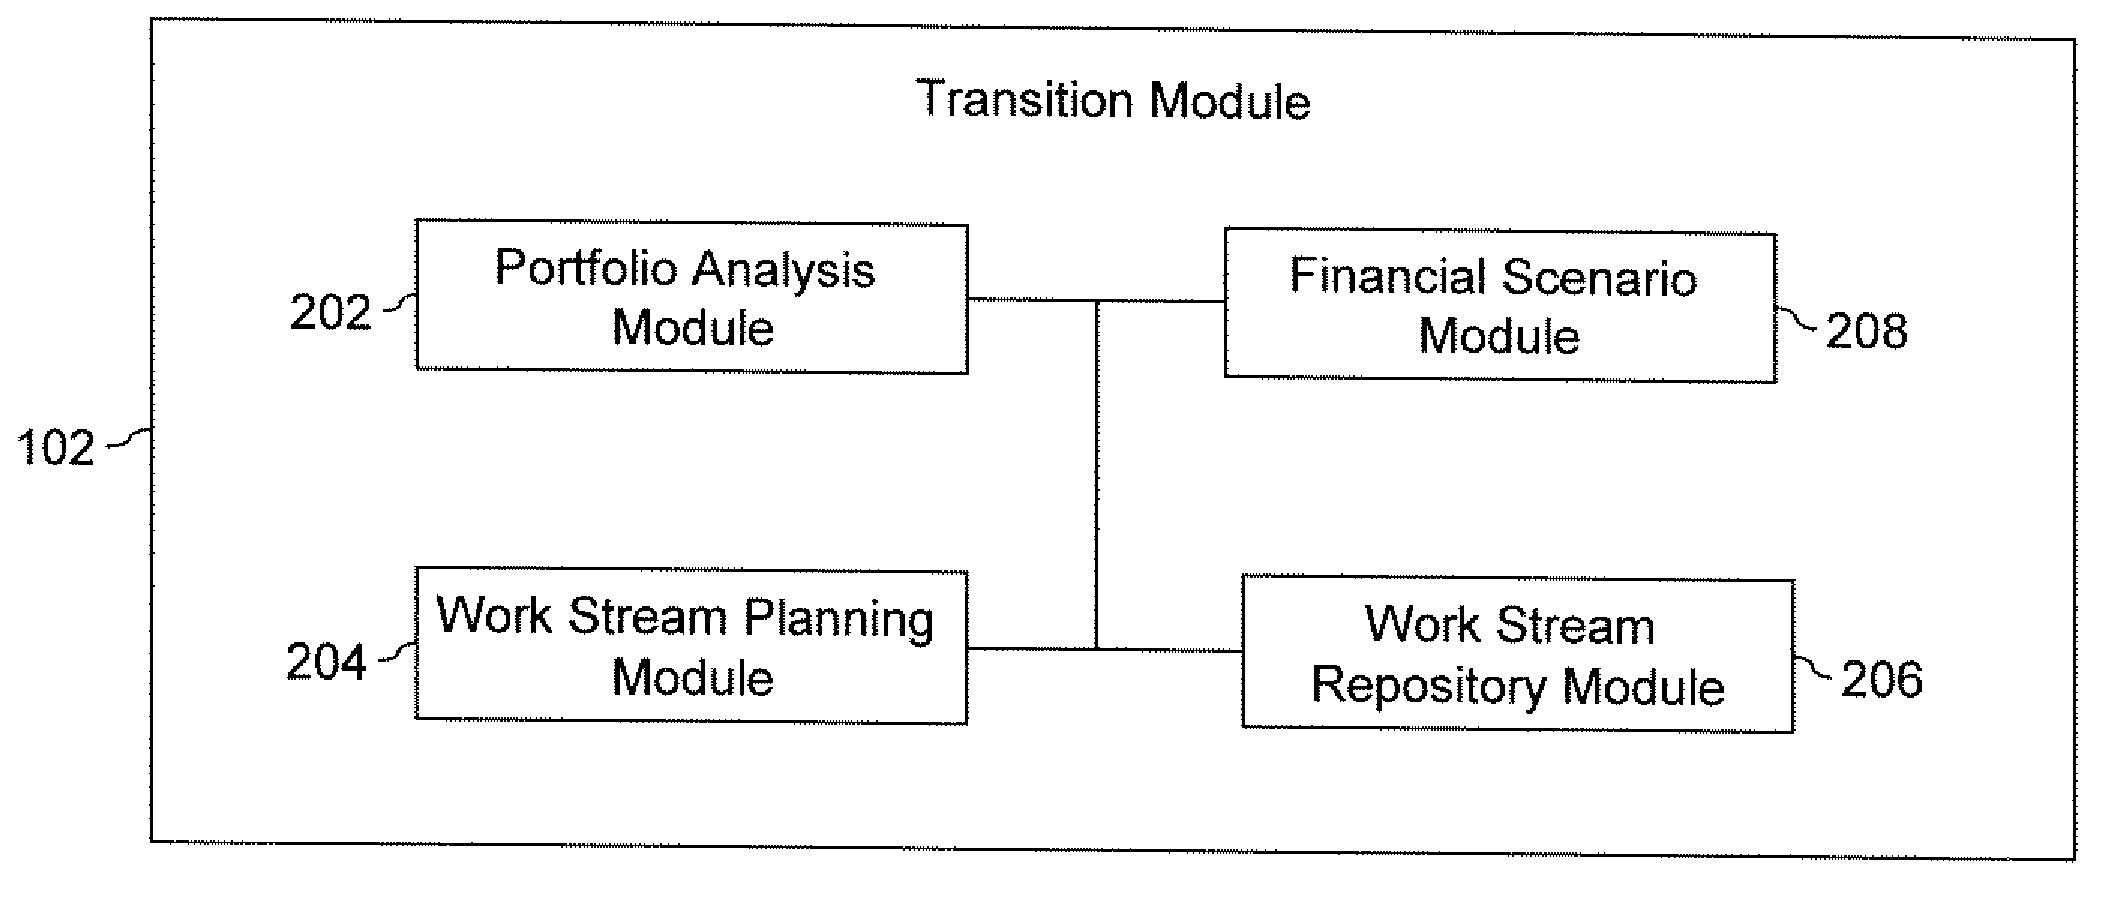 Framework for supporting transition of one or more applications of an organization